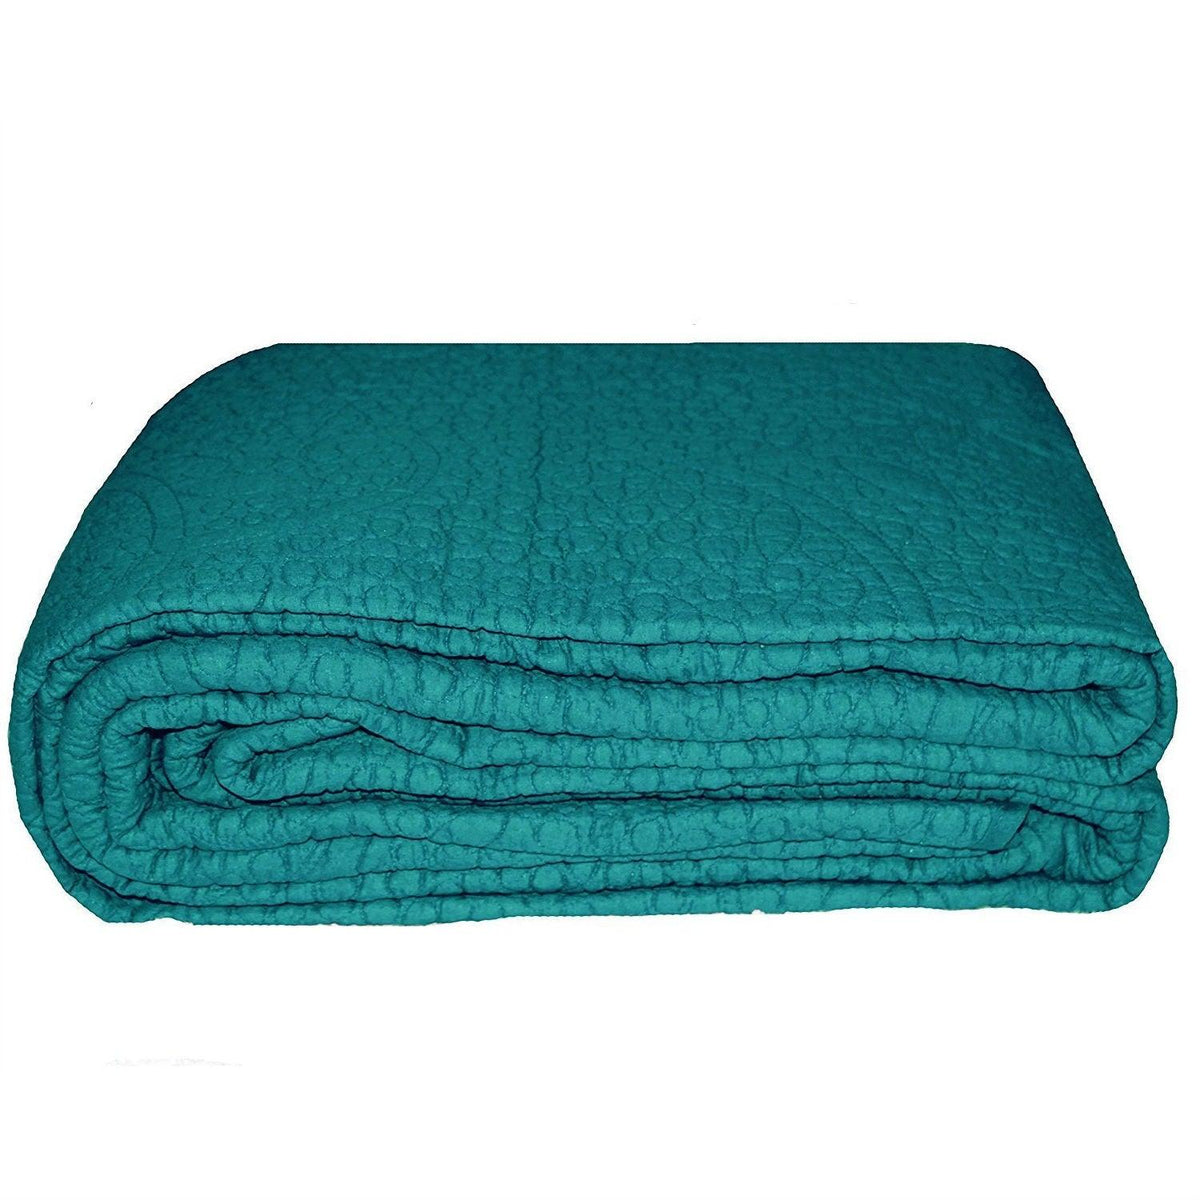 California King 3-Piece 100% Cotton Quilted Bedspread with Shams in Turquoise - beddingbag.com